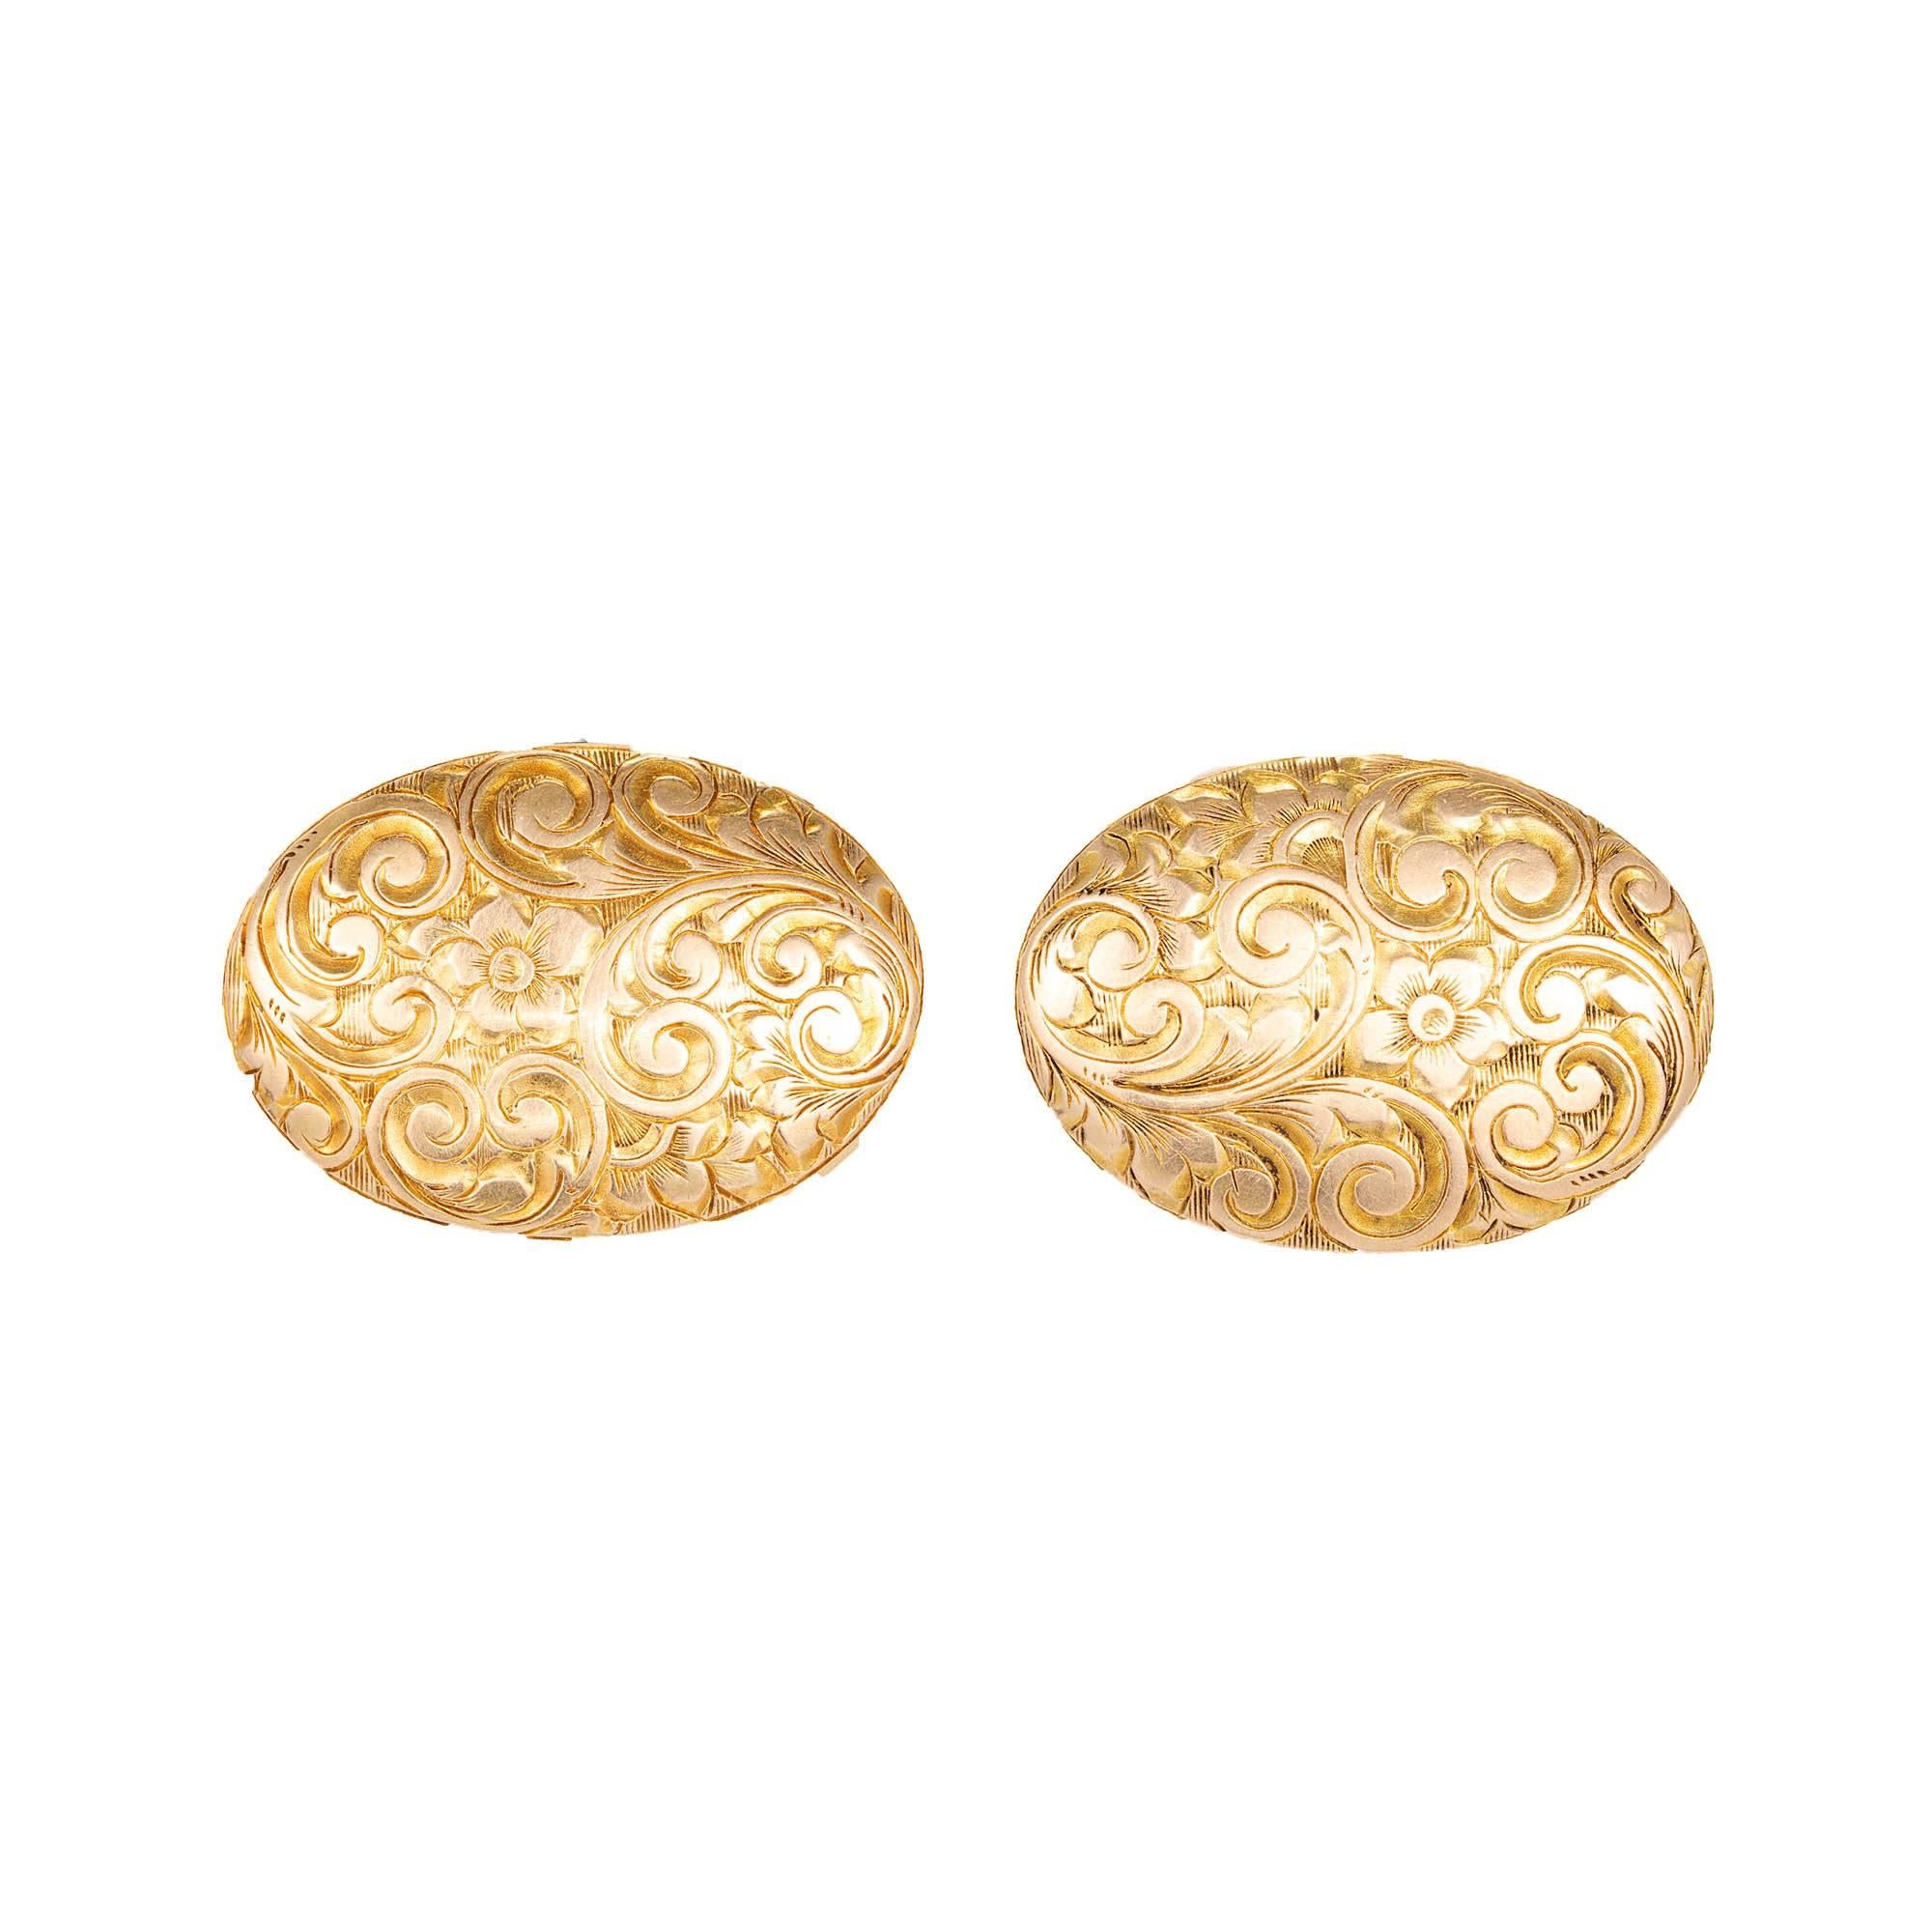 Riker Brothers Engraved Double Sided Textured Gold Cufflinks In Good Condition For Sale In Stamford, CT